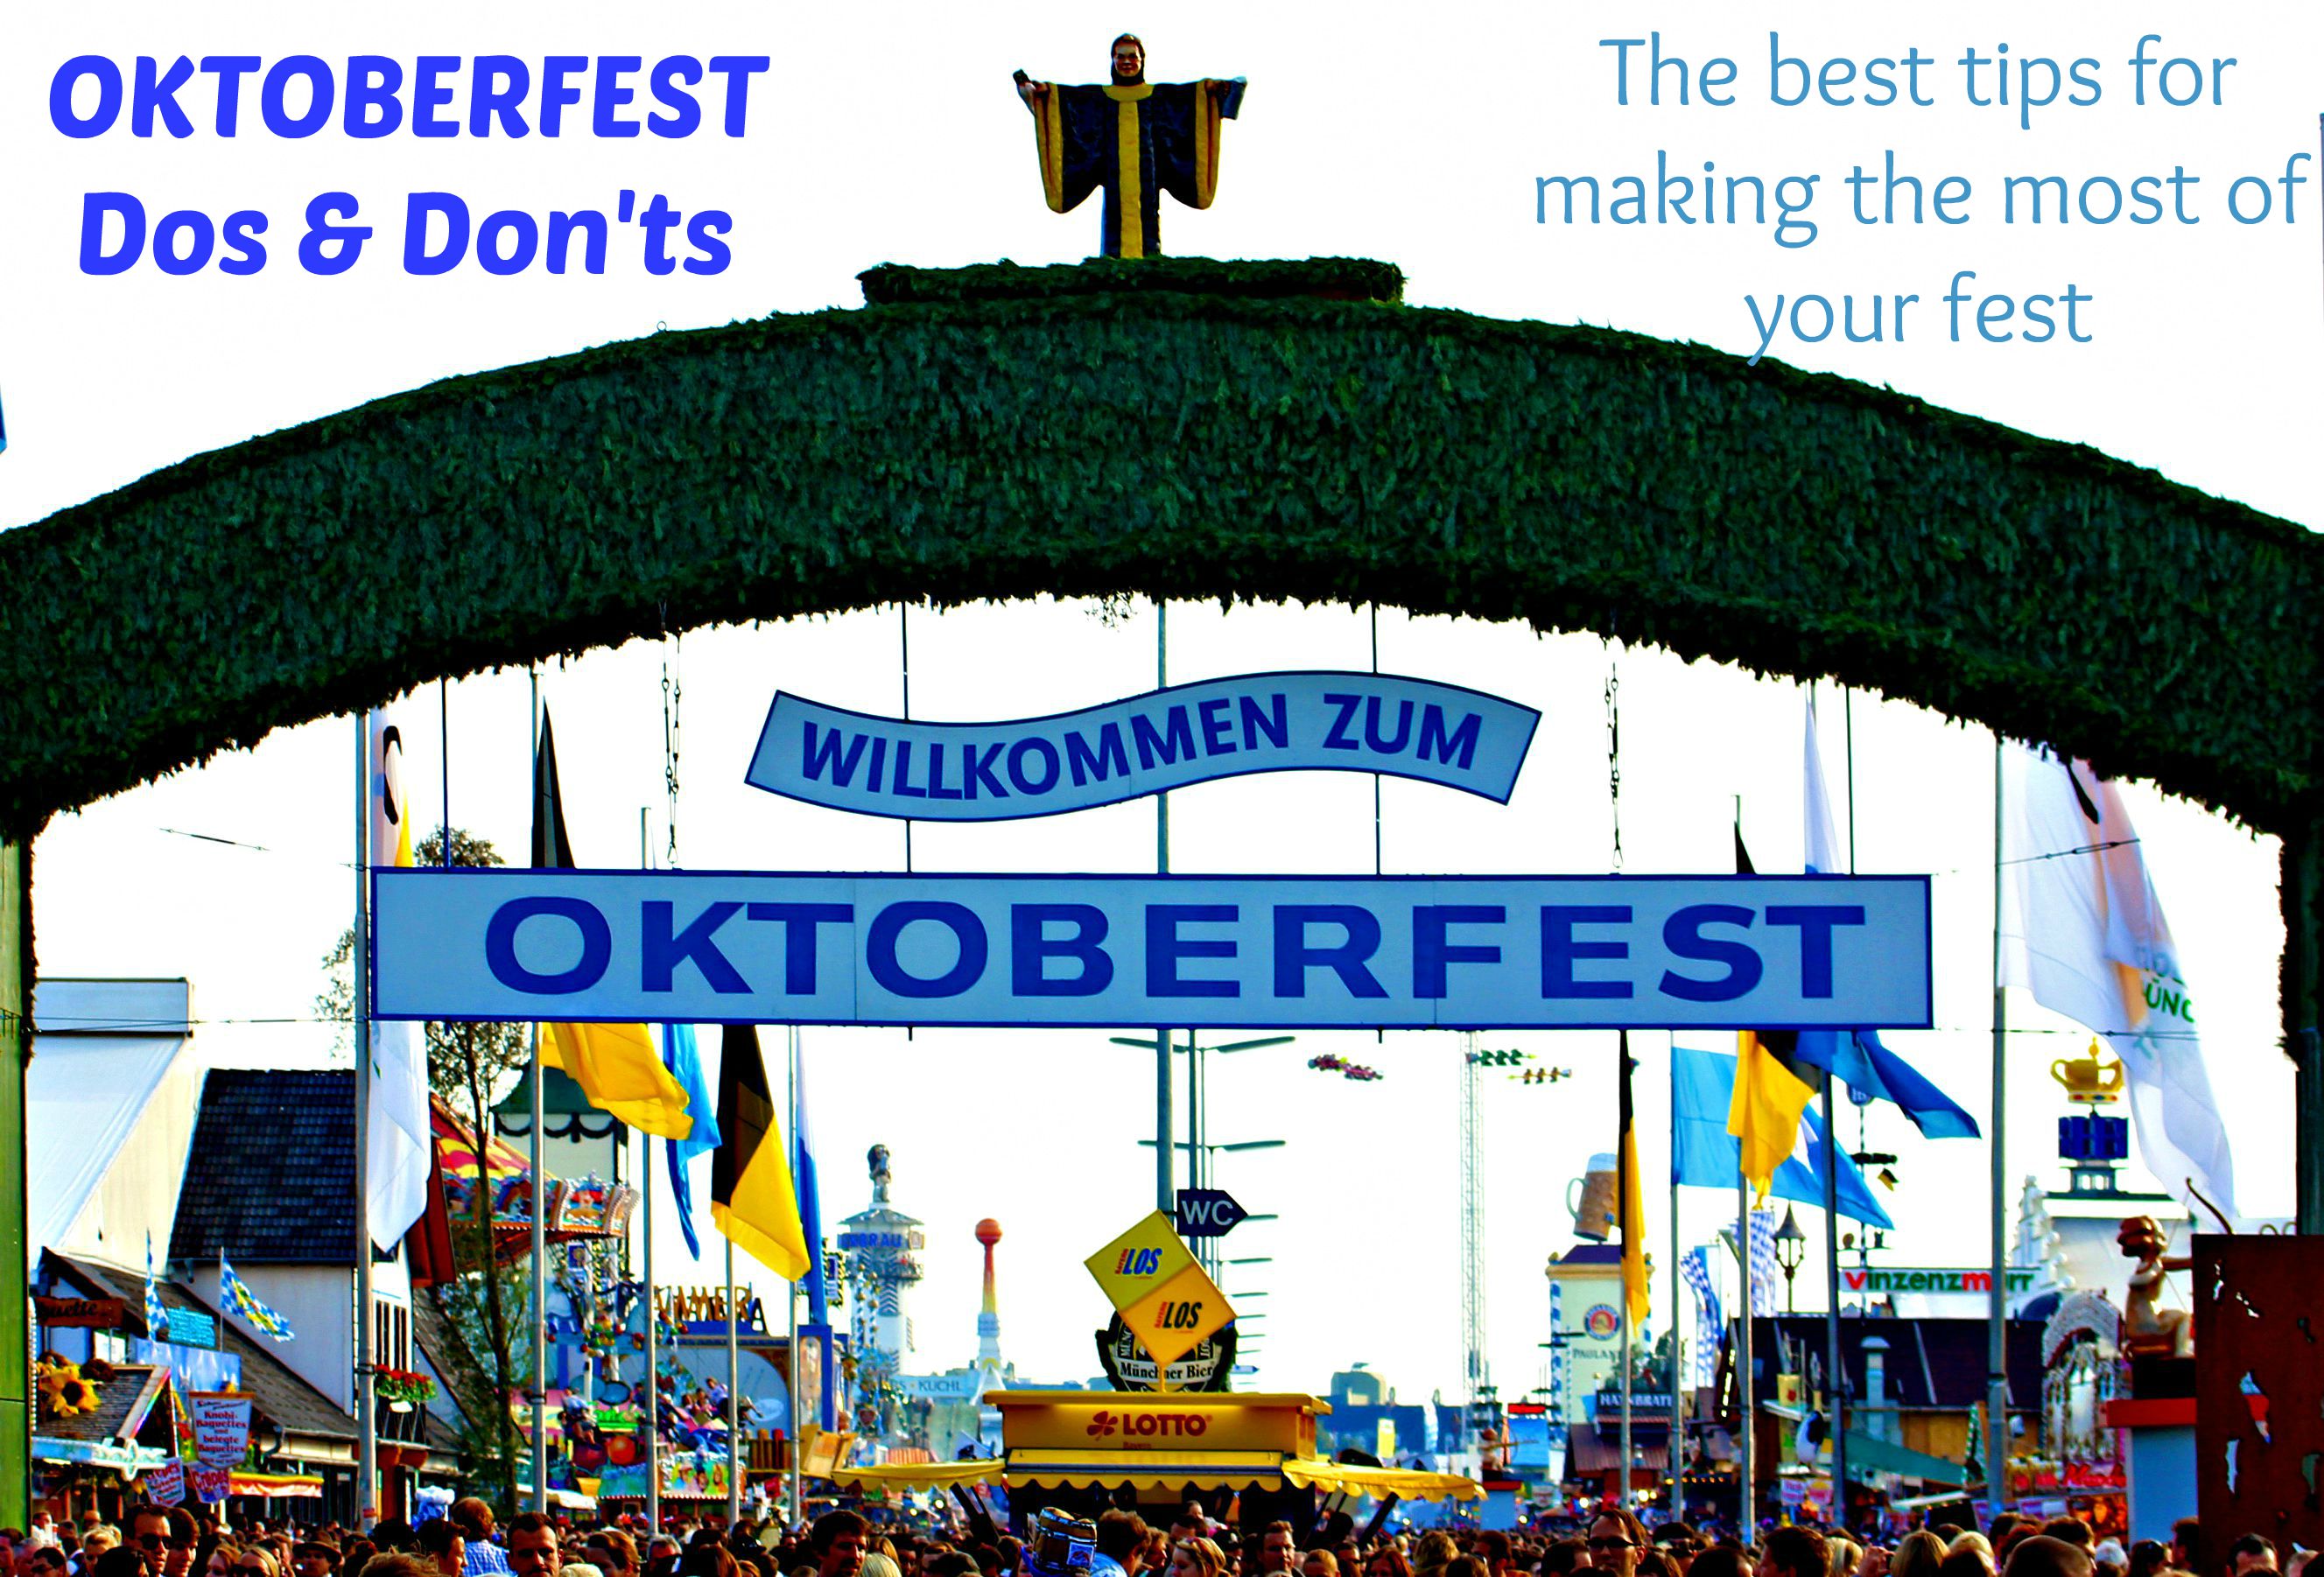 Oktoberfest Tips Dos and Dont's